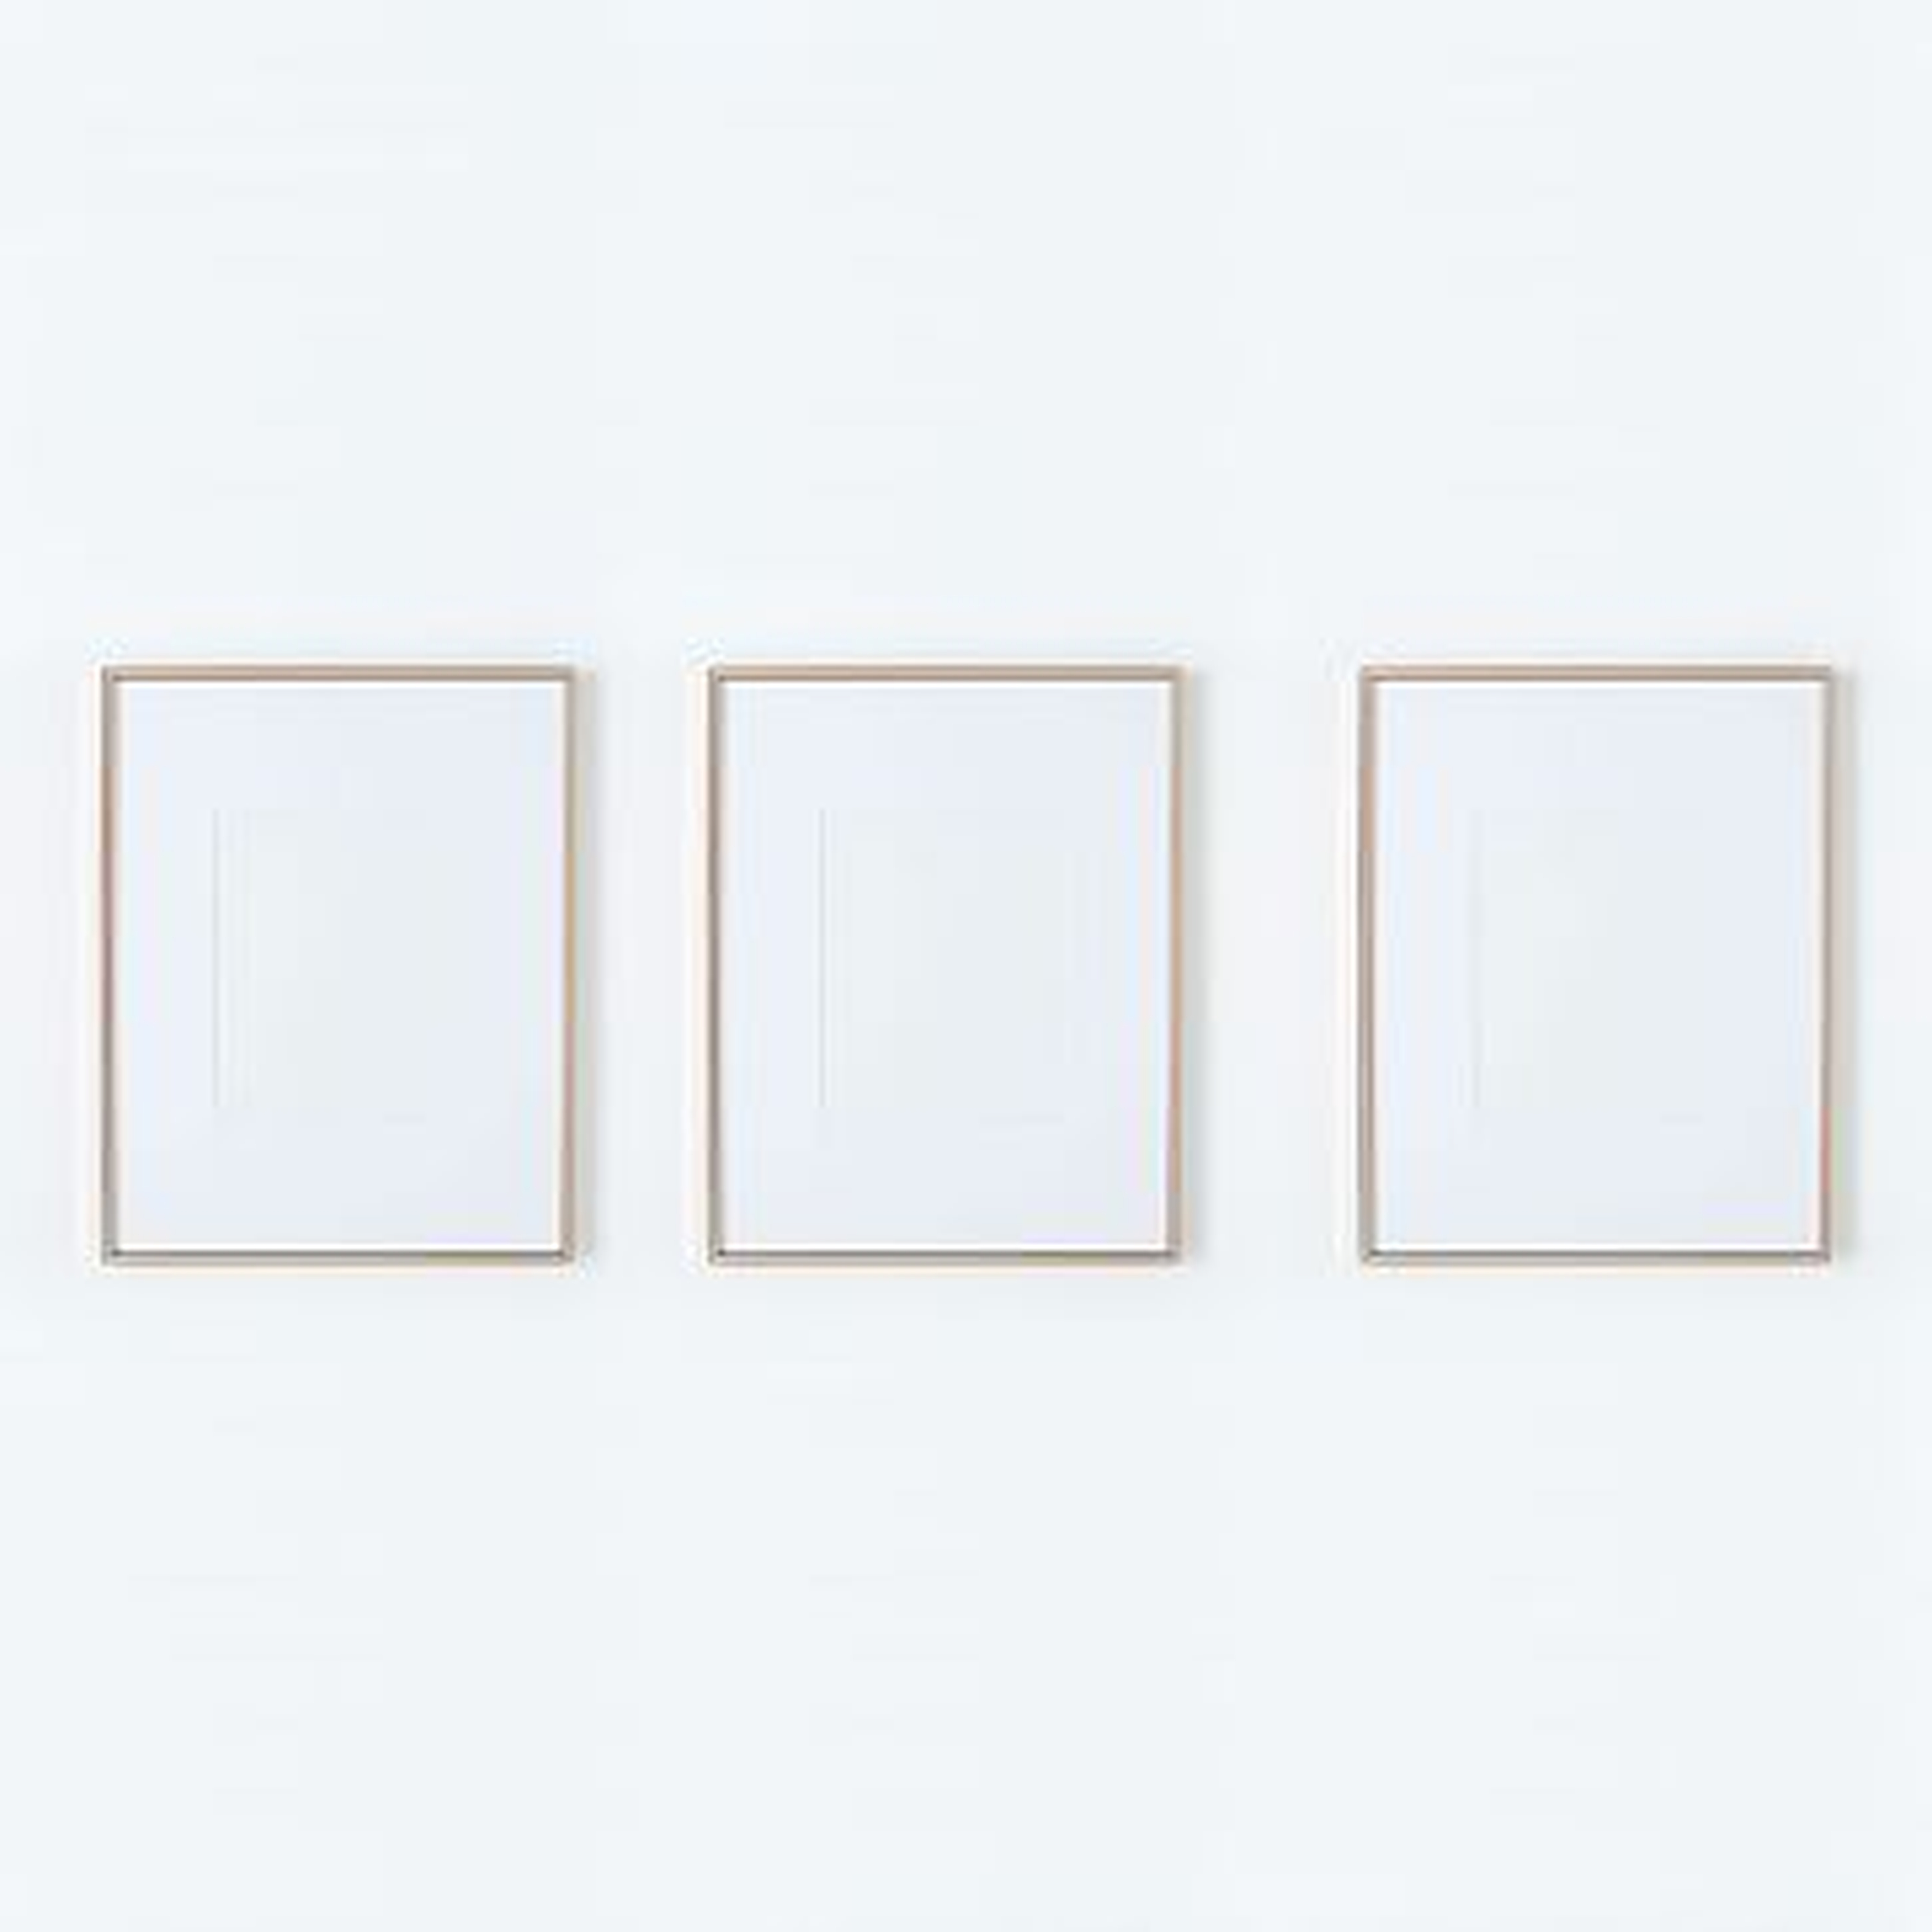 Gallery Frame, Rose Gold, Set of 3, 8" x 10" (15" x 19" without mat) - West Elm